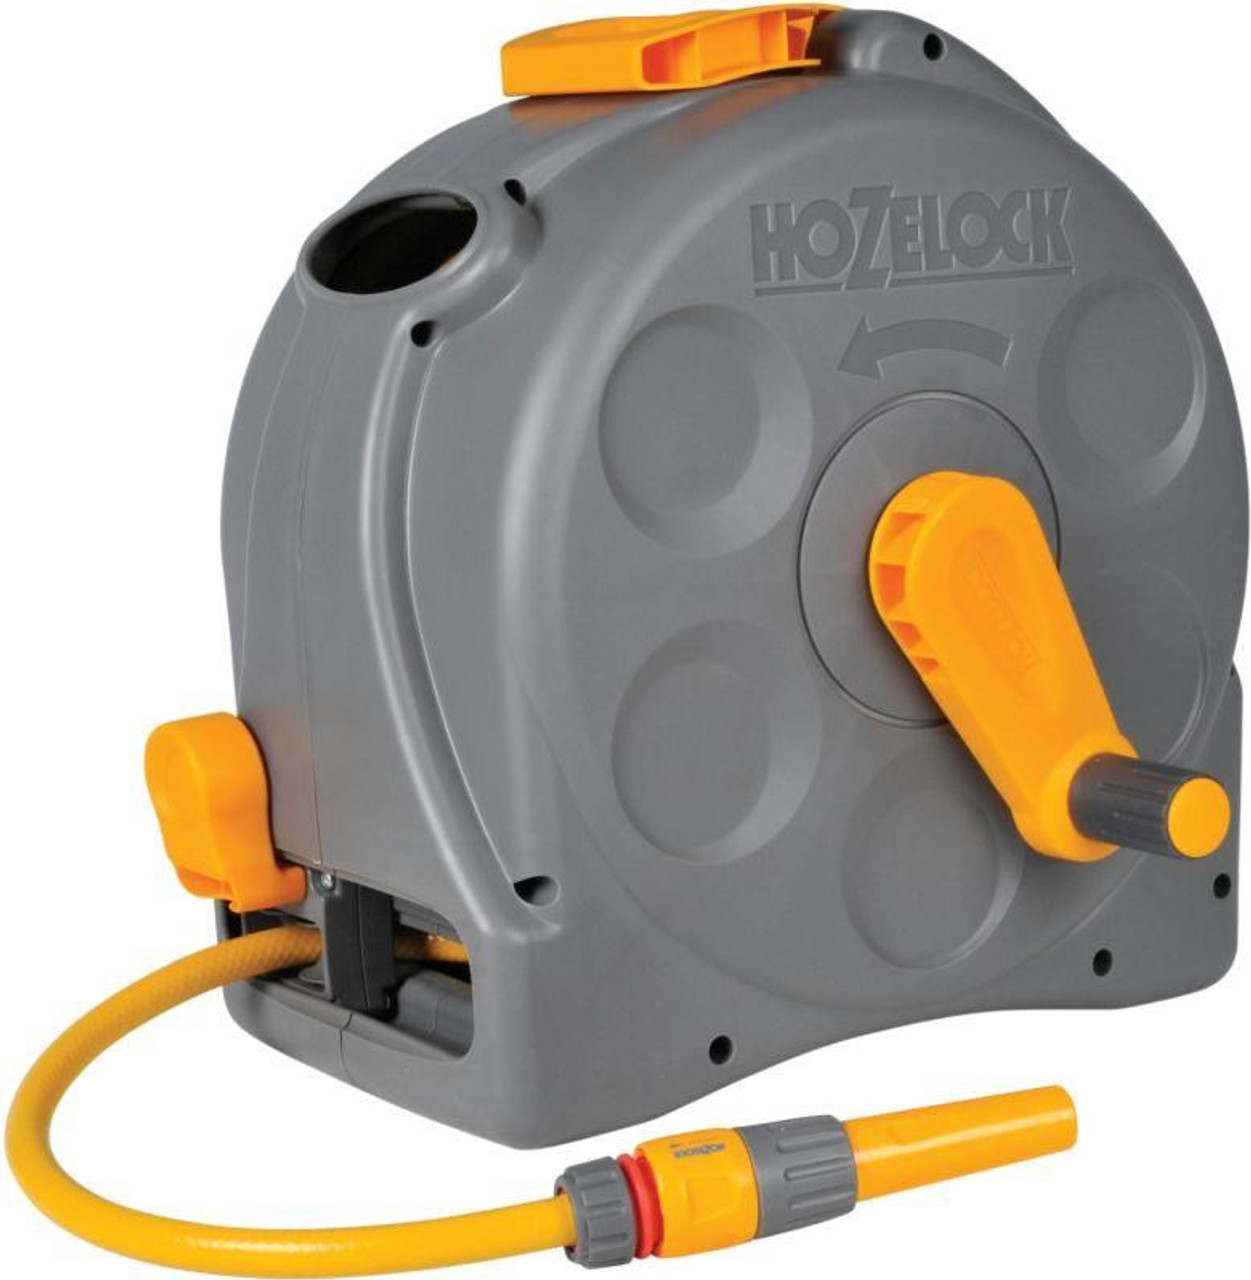 Hozelock Compact 2 in 1